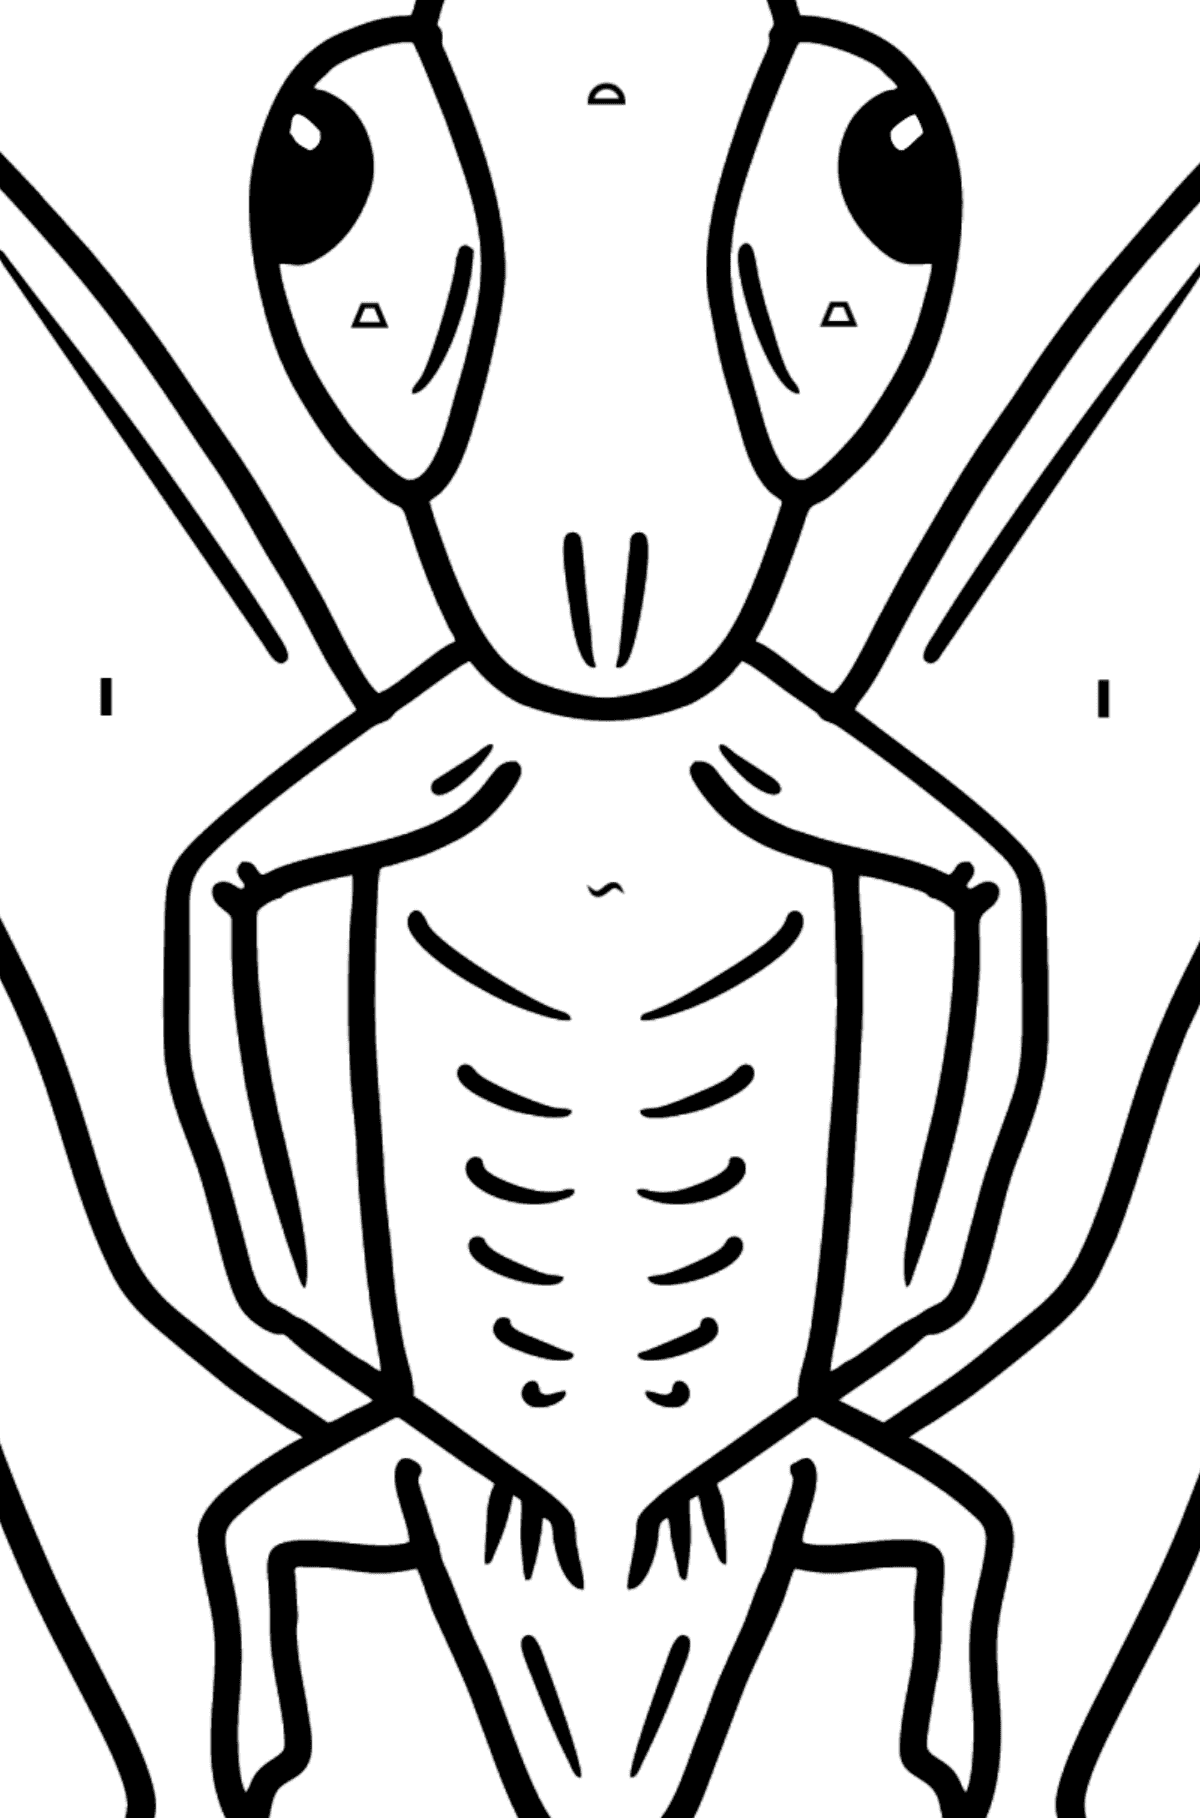 Grasshopper coloring page - Coloring by Symbols and Geometric Shapes for Kids